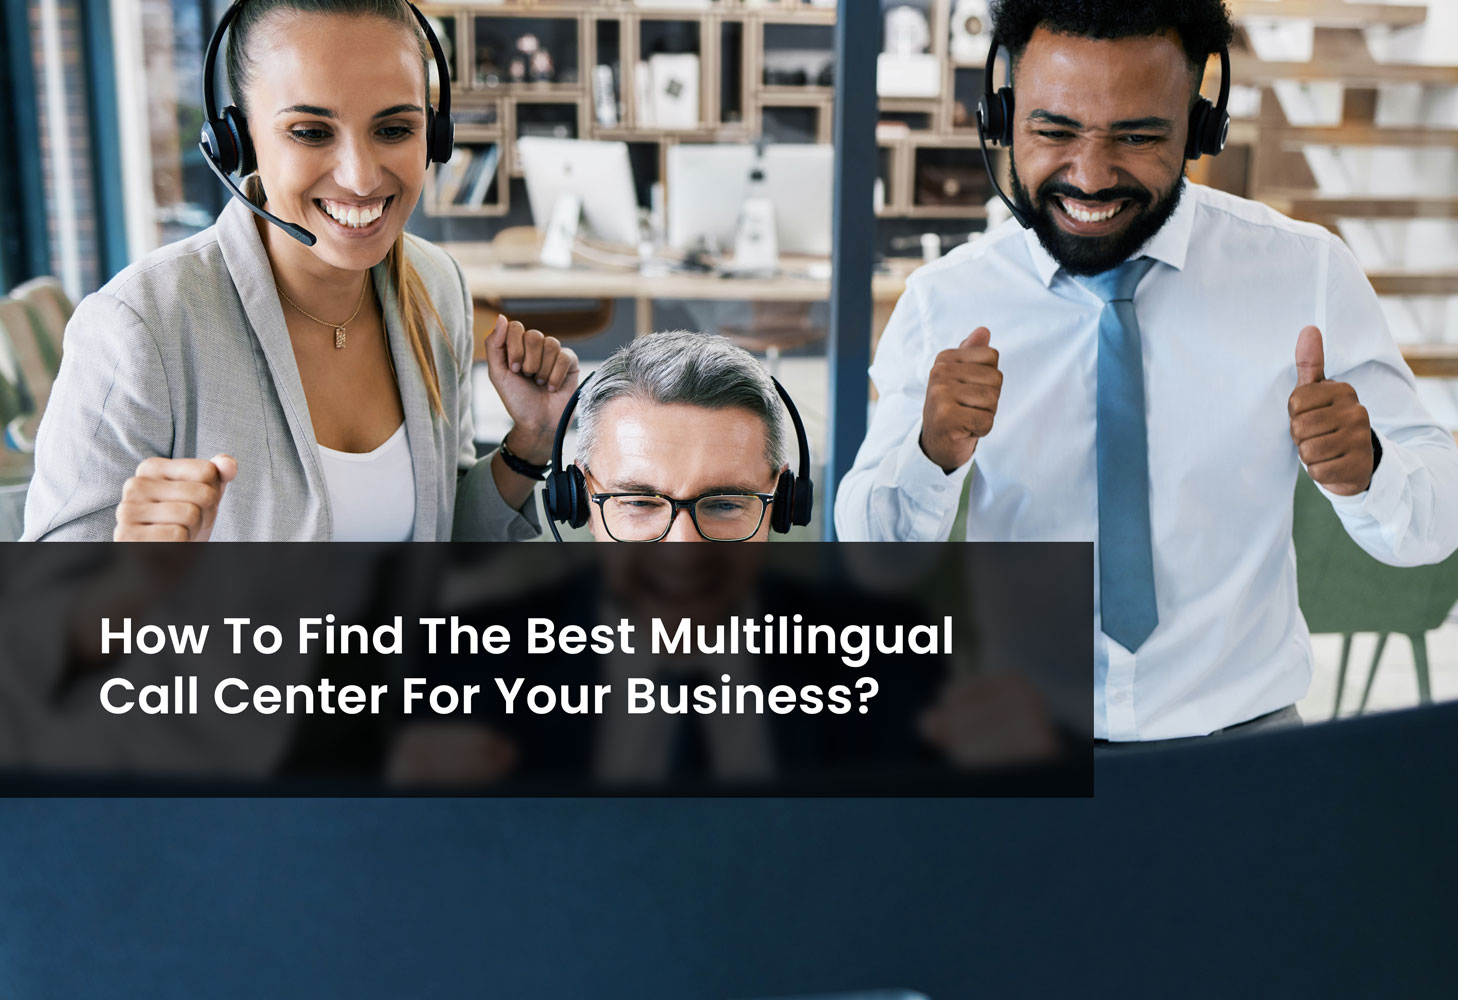 How To Find The Best Multilingual Call Center For Your Business?